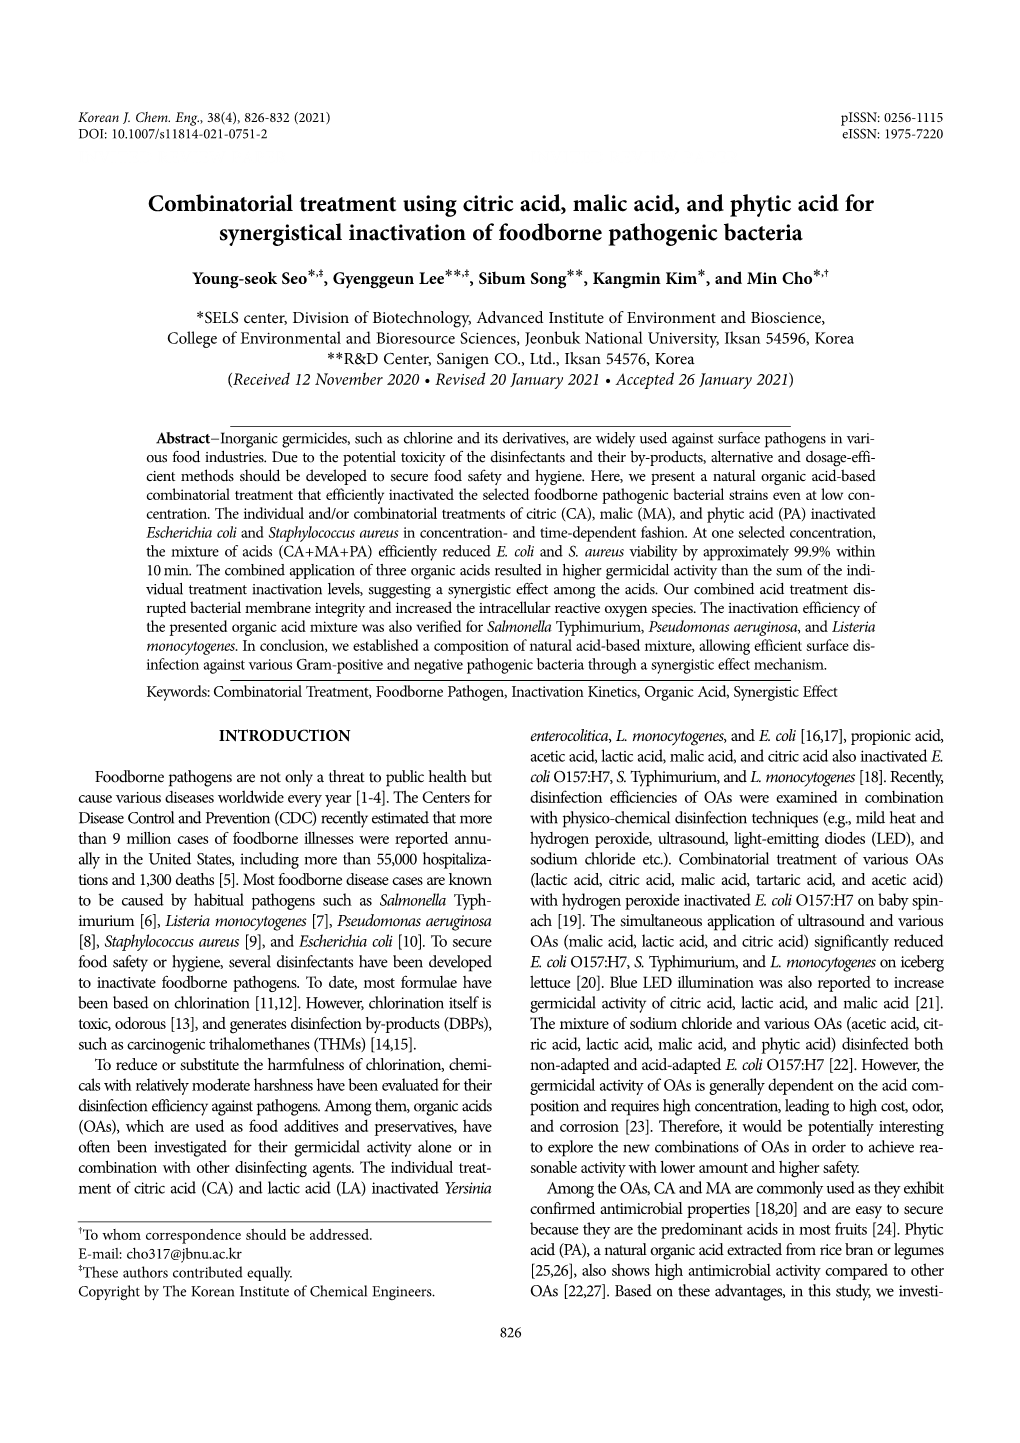 Combinatorial Treatment Using Citric Acid, Malic Acid, and Phytic Acid for Synergistical Inactivation of Foodborne Pathogenic Bacteria